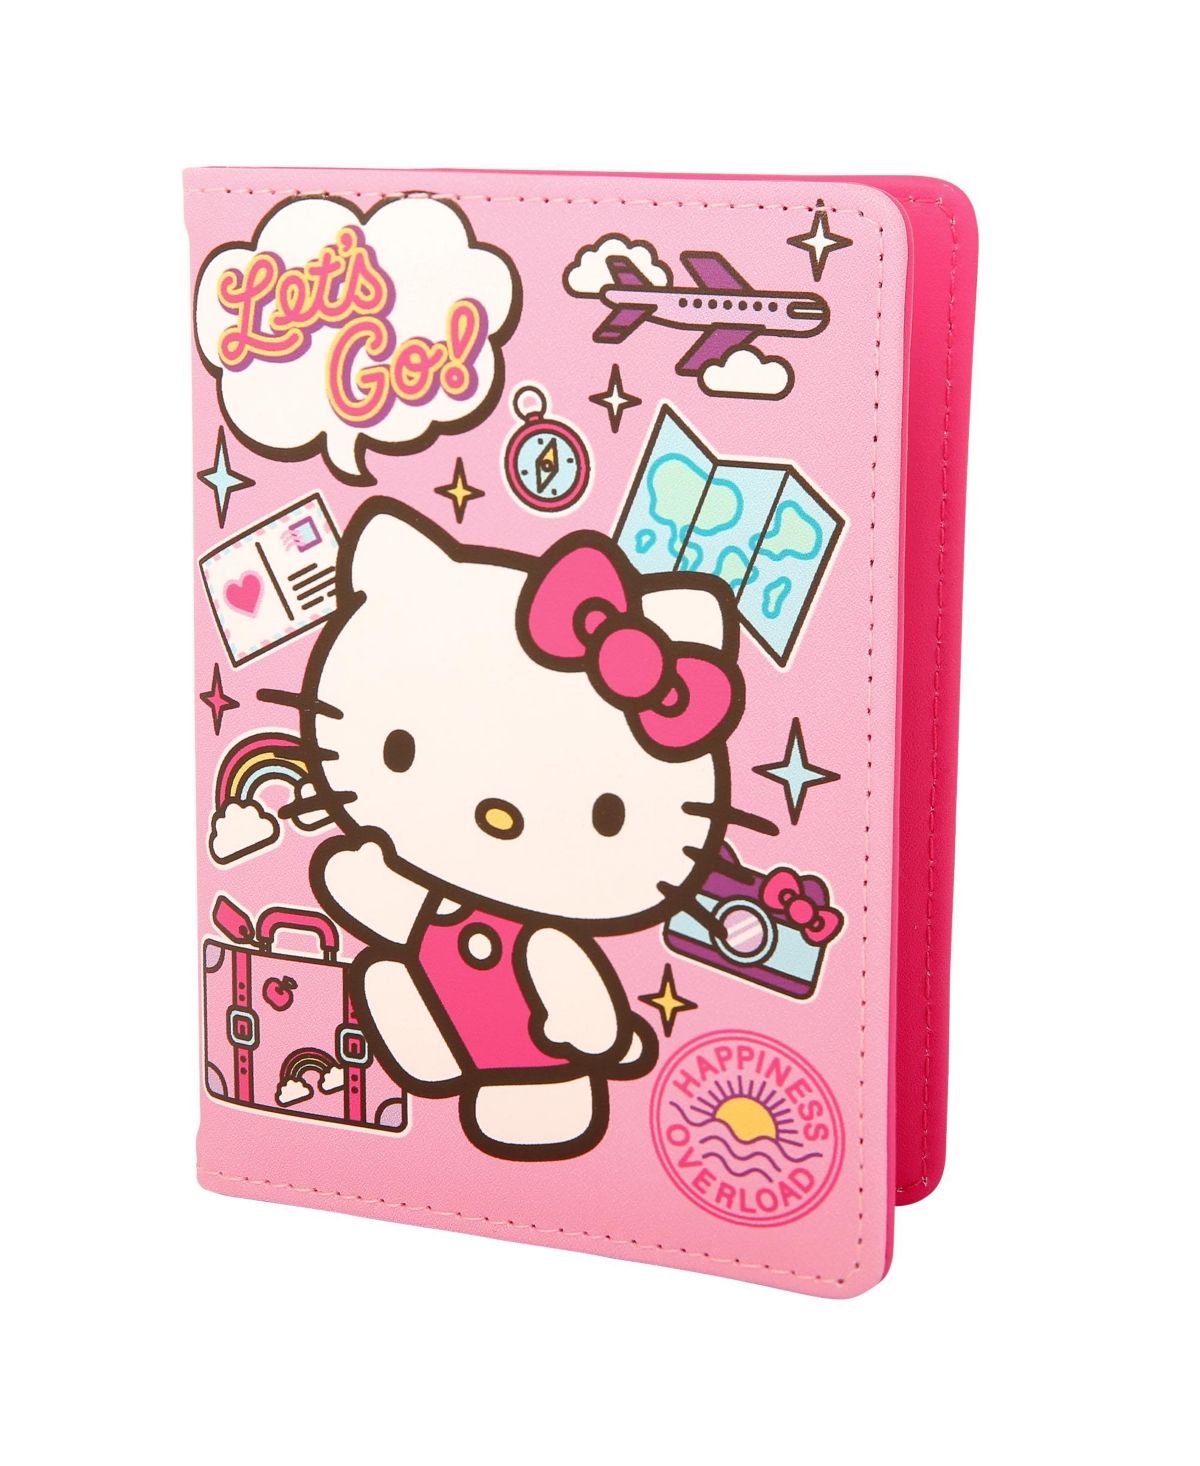 Sanrio Hello Kitty Passport Holder and Luggage Tag Set, Travel Gift Accessories - Pink, white